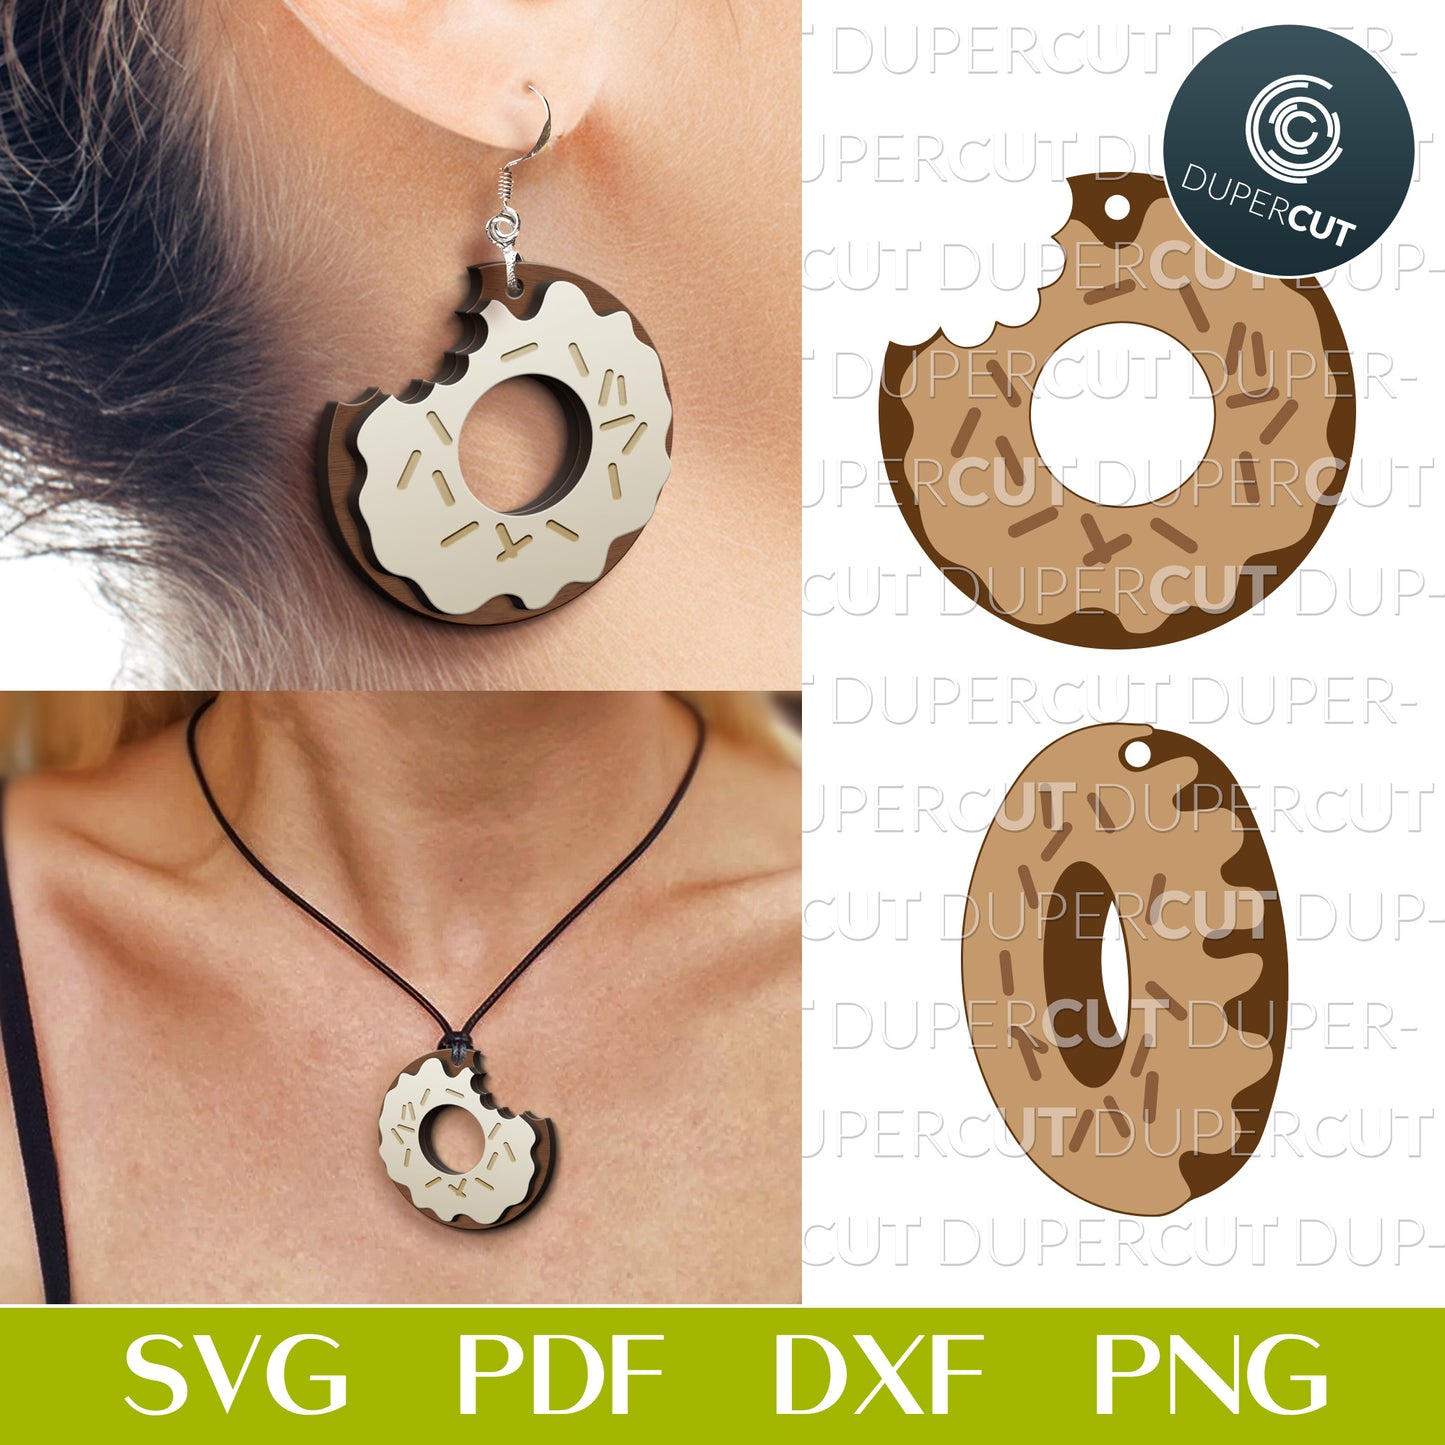 Donut earrings and necklace set - SVG DXF laser cutting files template pattern for Glowforge, Cricut, Silhouette, CNC plasma machines by www.DuperCut.com